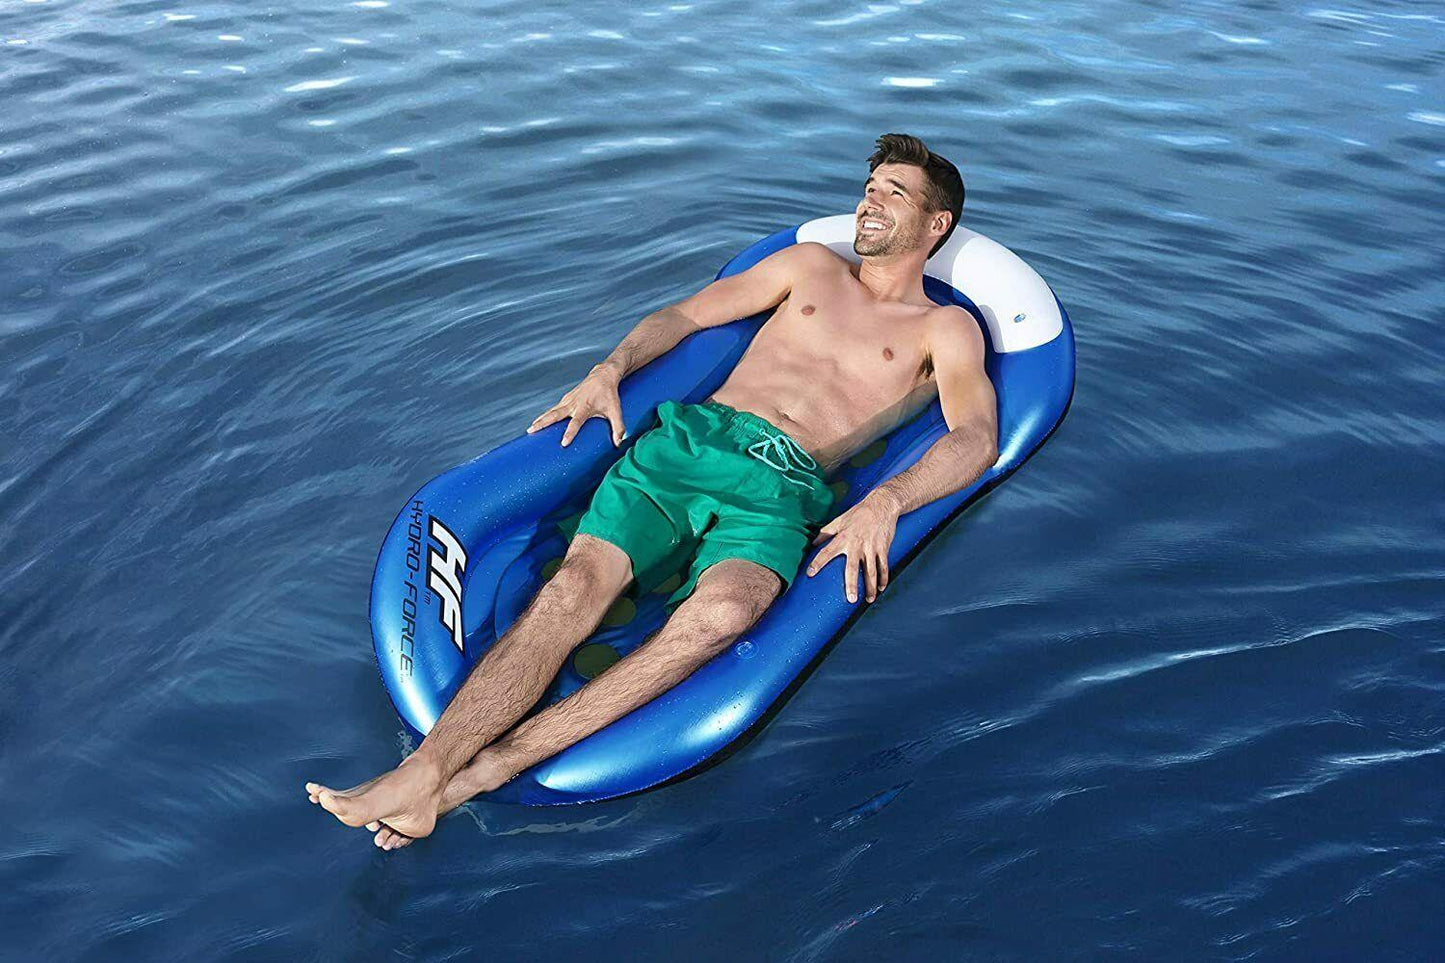 Bestway BW43156 Hydro-Force Summer Vibes Inflatable Pool Float by Bestway - UKBuyZone